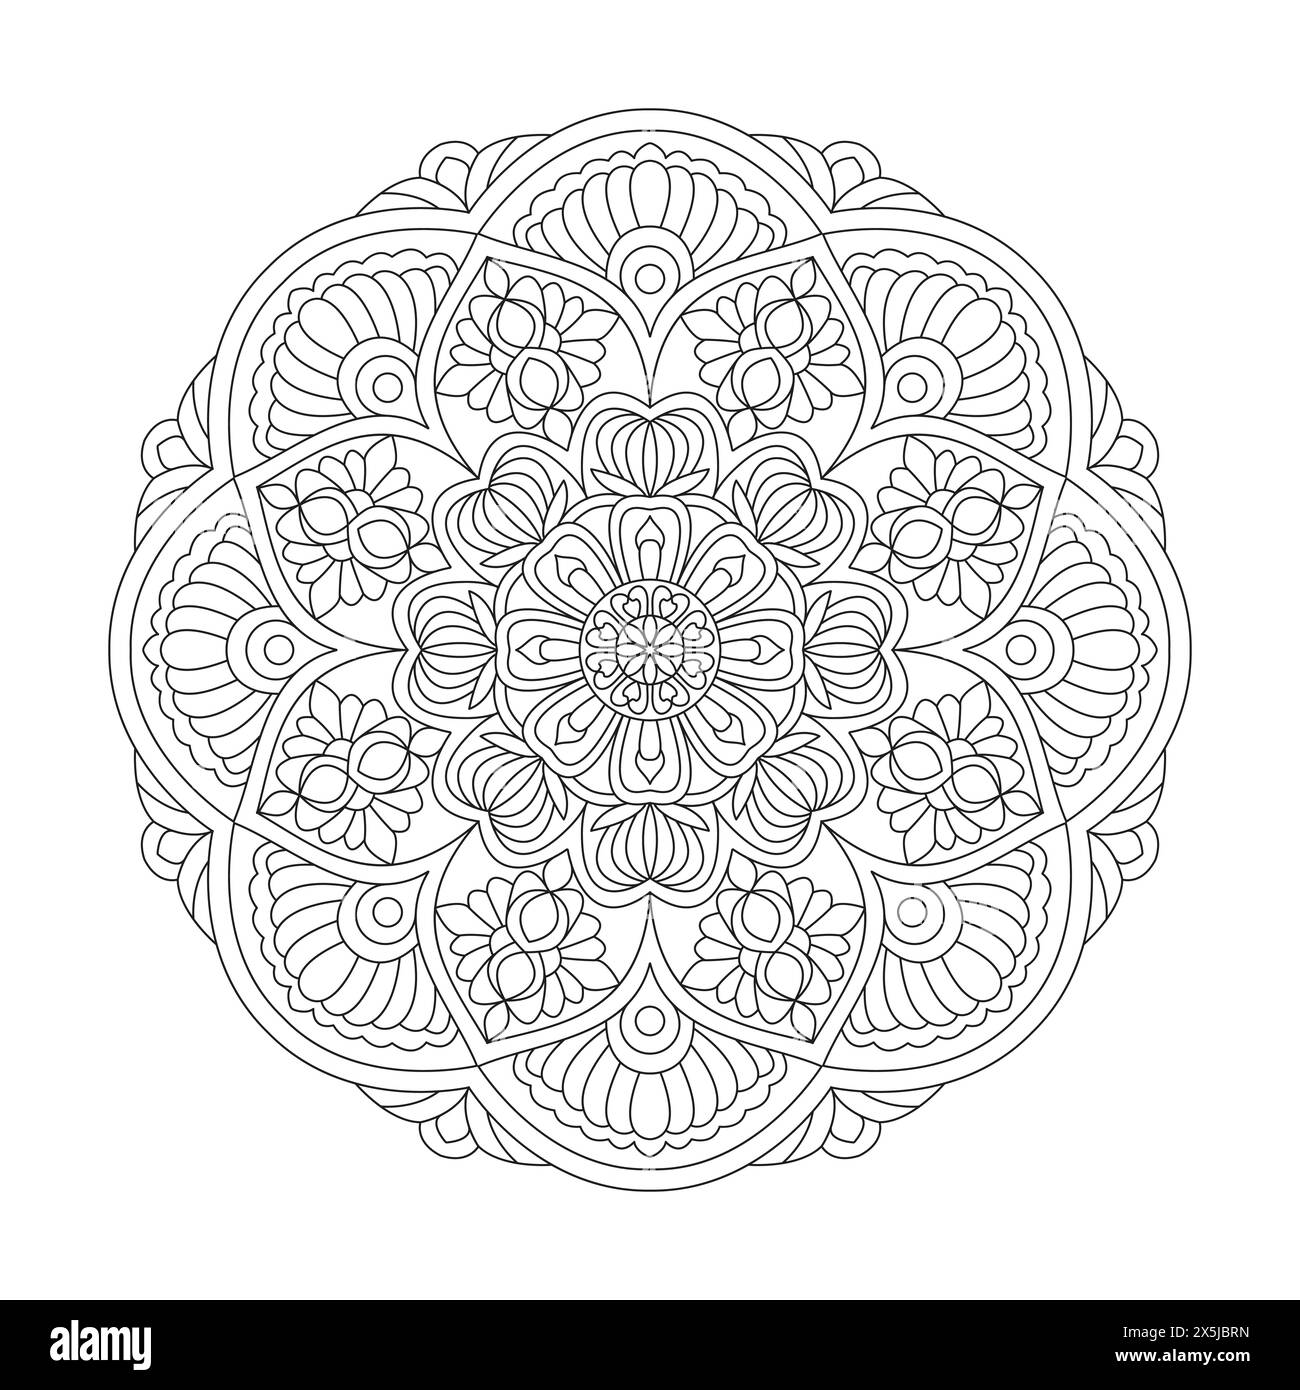 Mandala Rainbow Kids Coloring Book Page for kdp Book Interior. Peaceful Petals, Ability to Relax, Brain Experiences, Harmonious Haven, Peaceful Portra Stock Vector